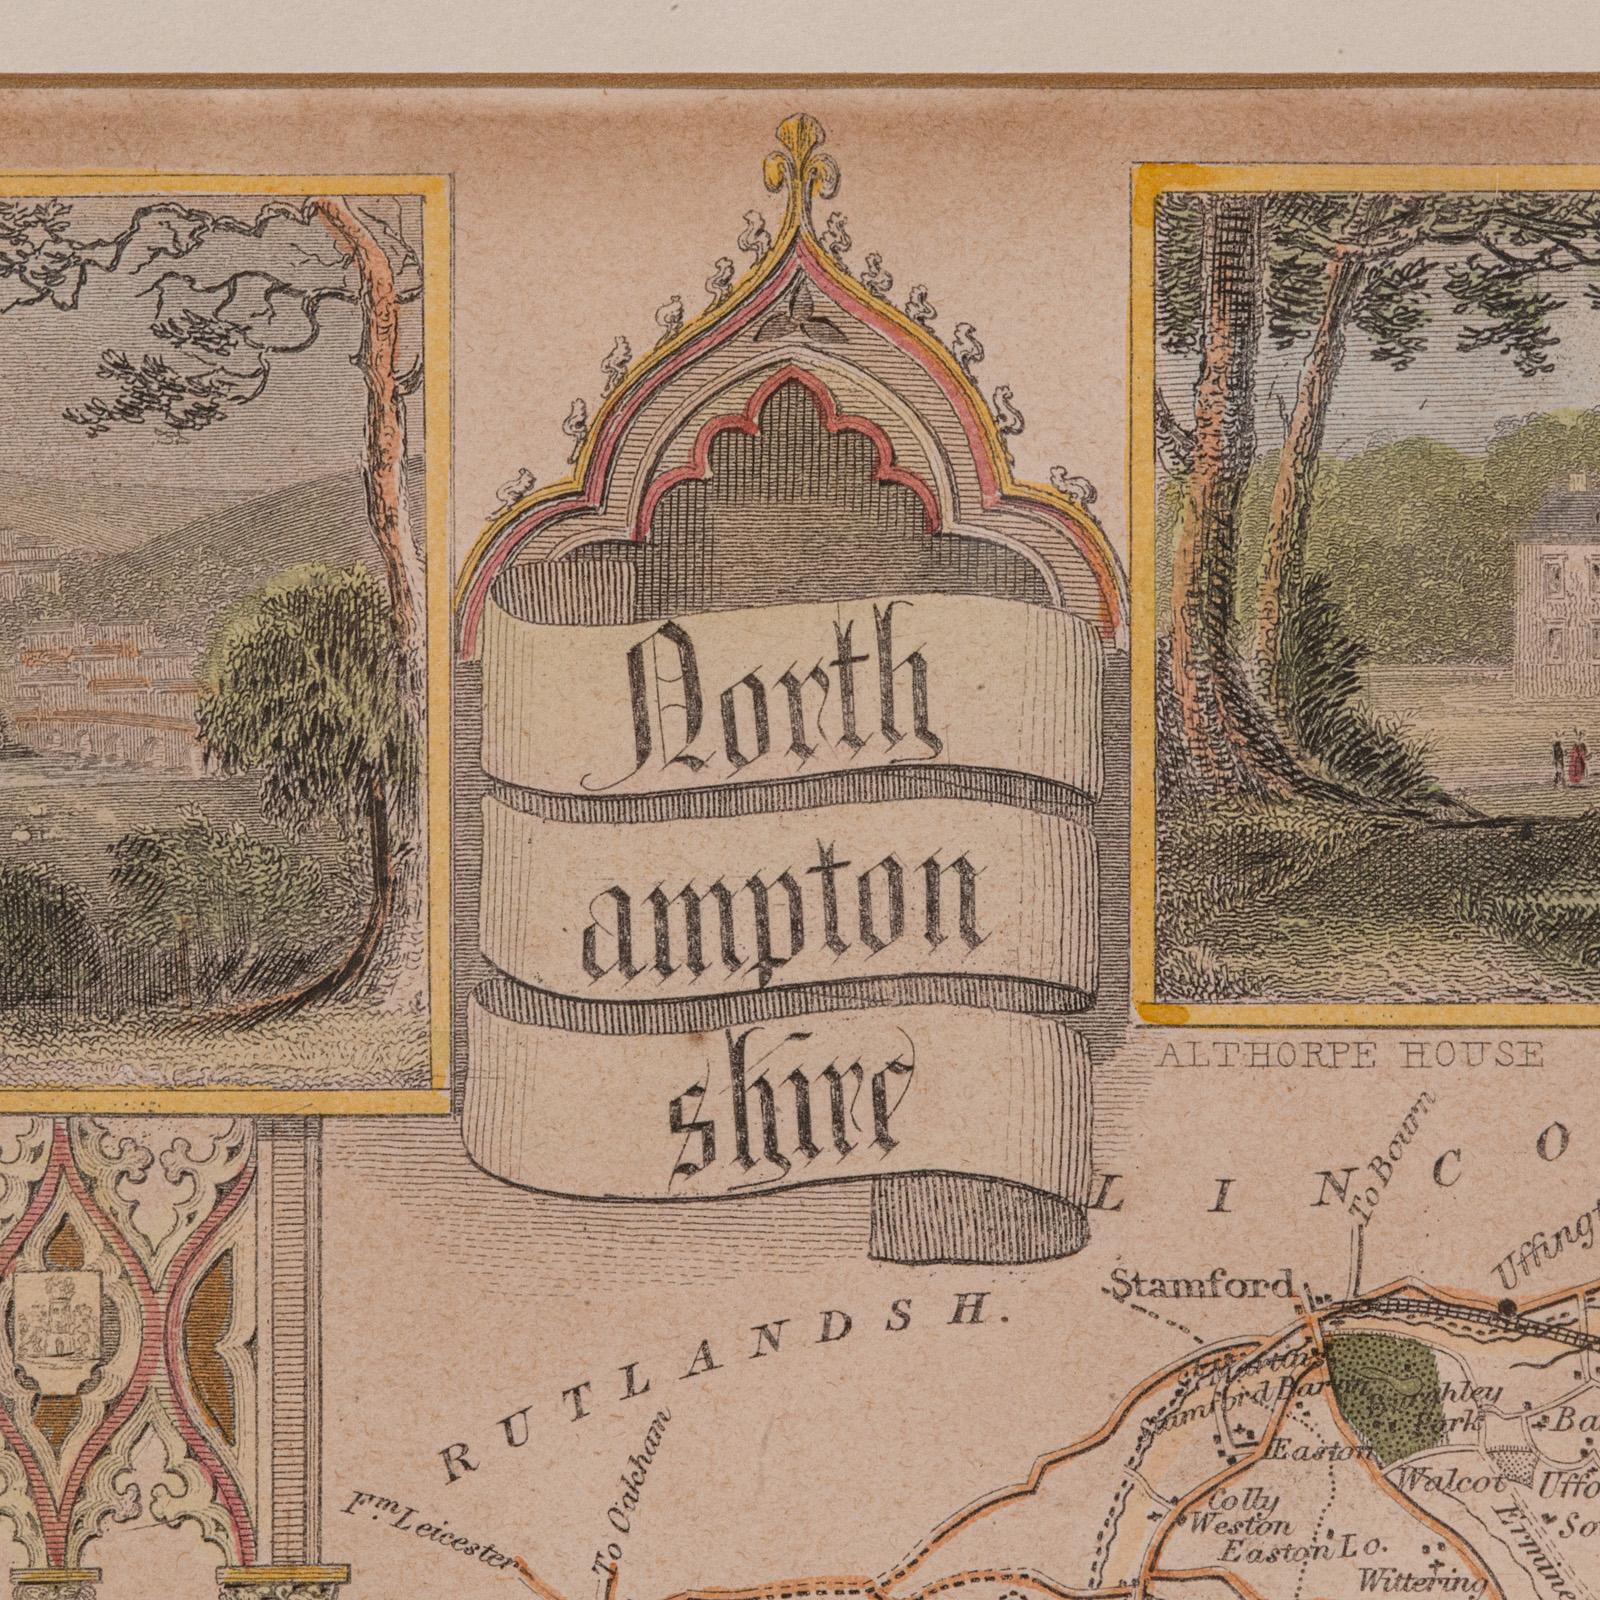 Wood Antique Lithography Map, Hertfordshire, English, Framed Engraving, Cartography For Sale